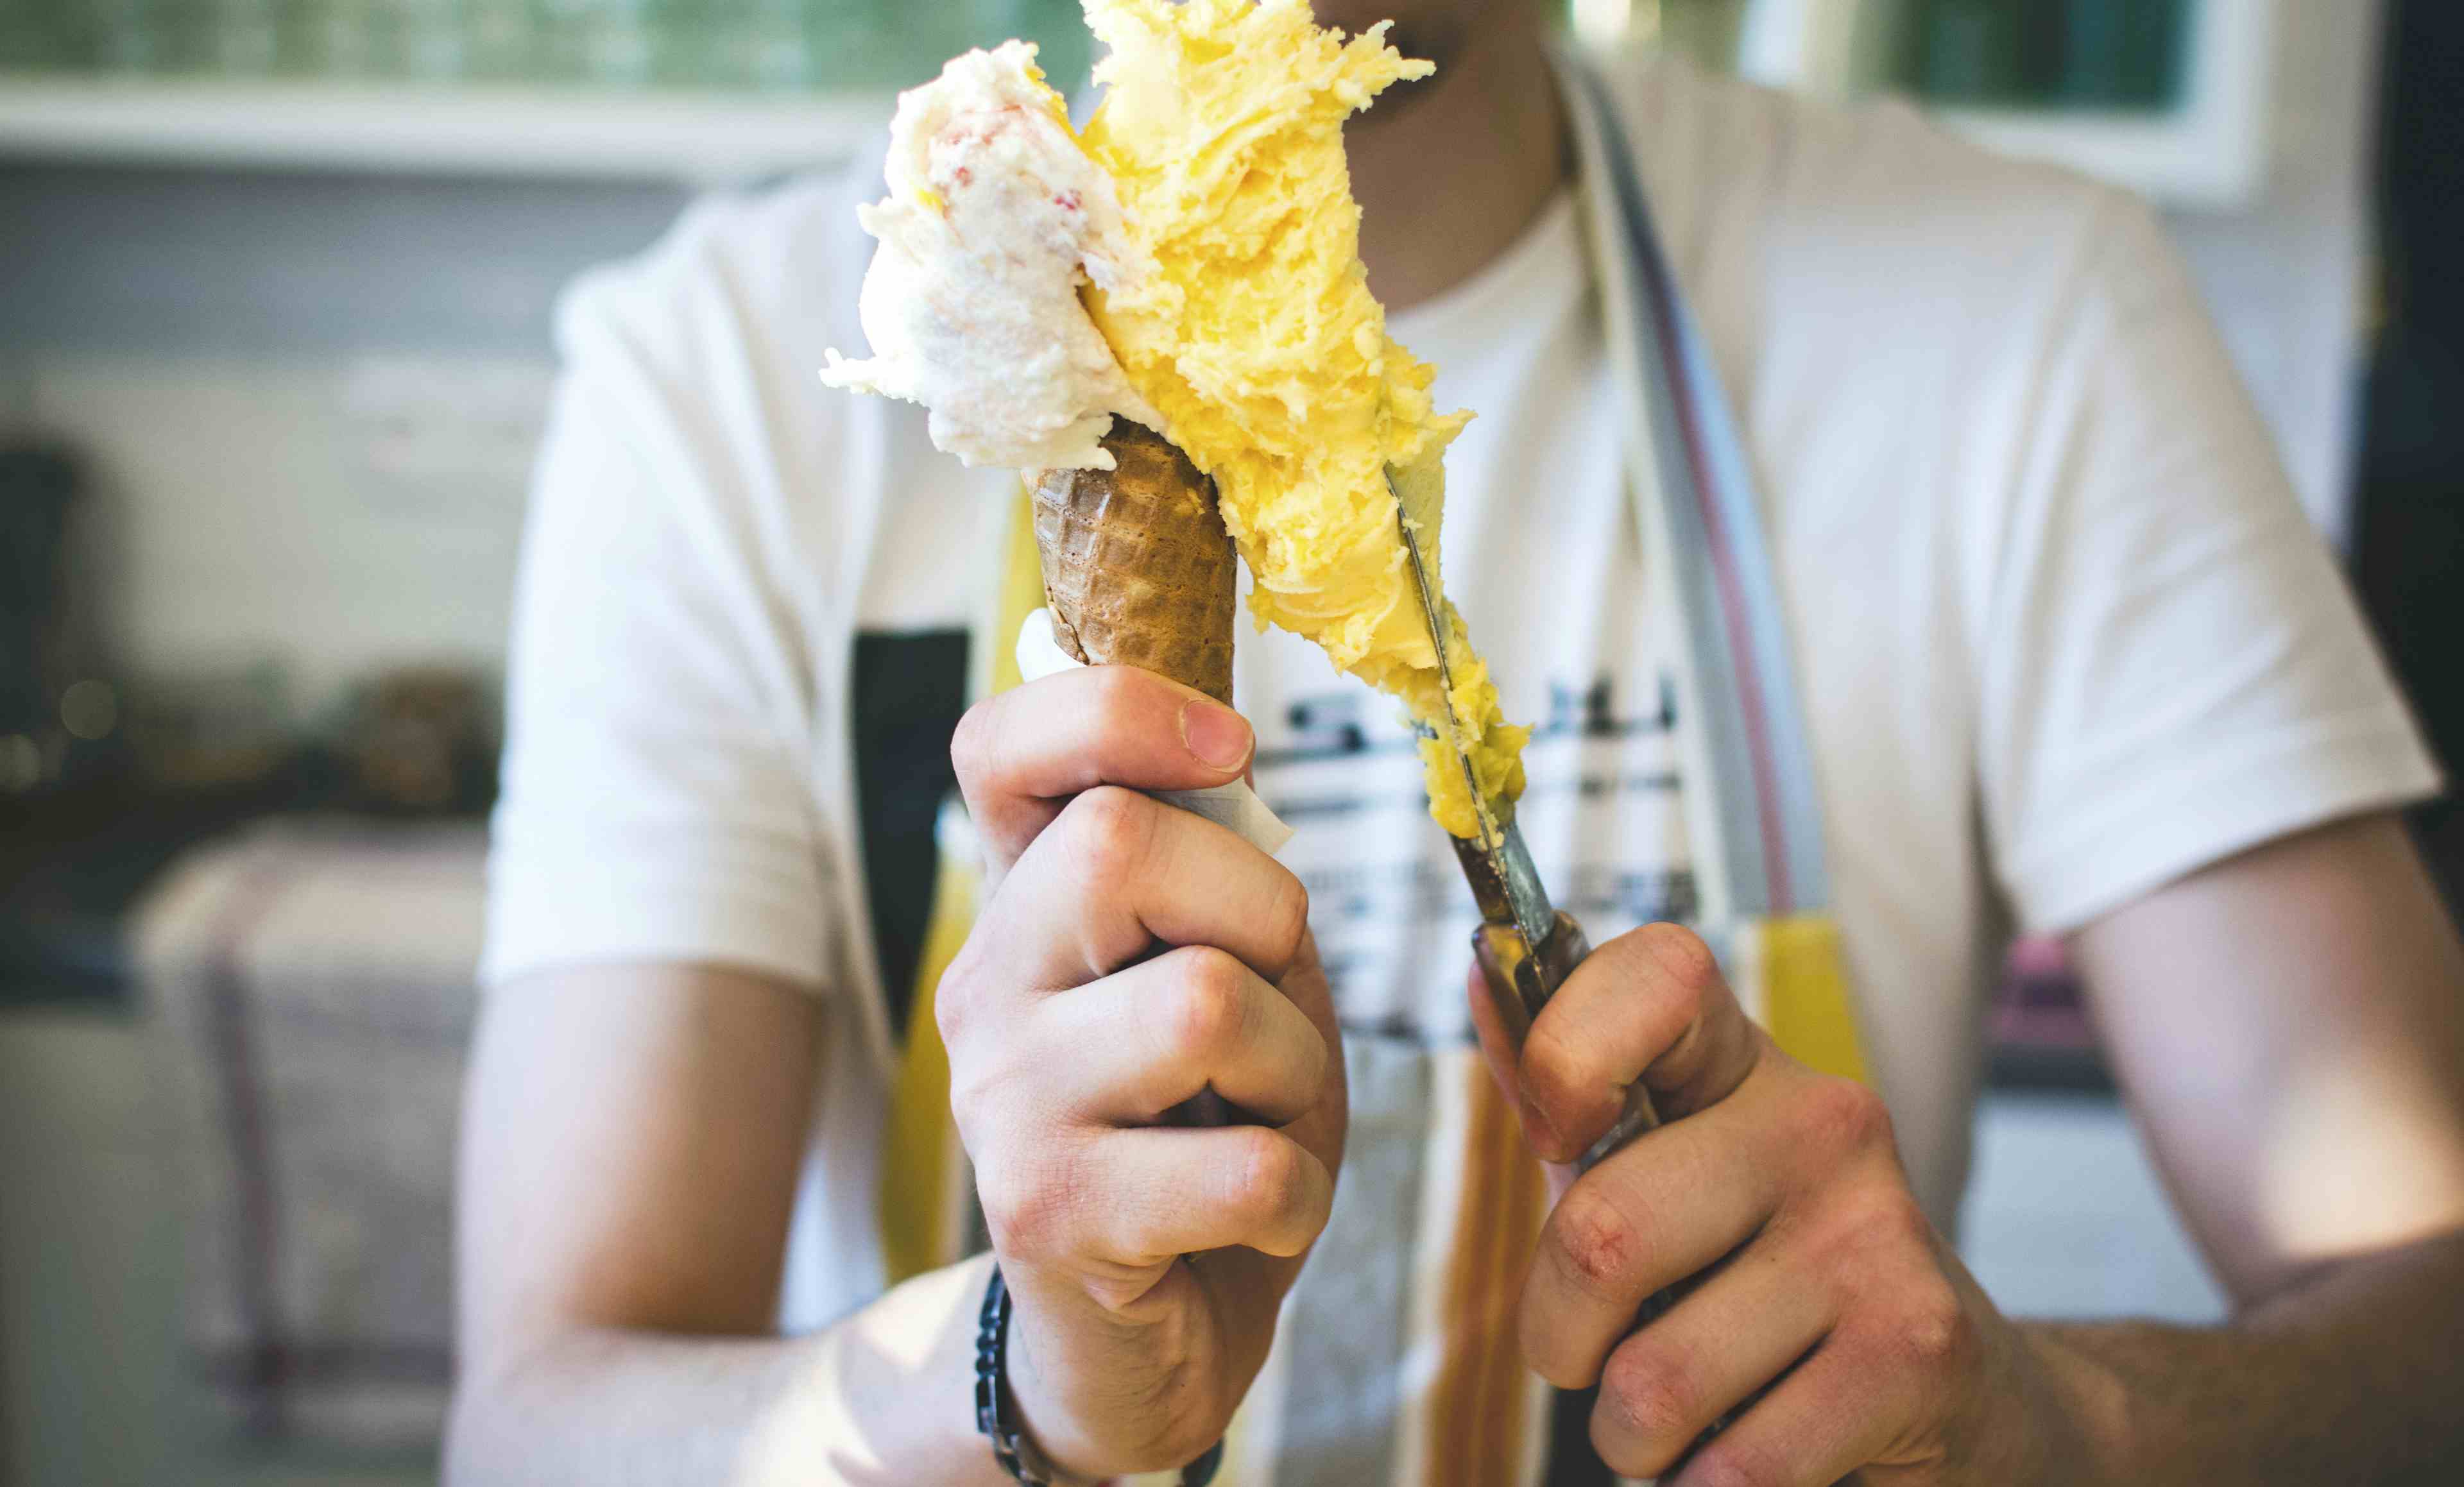 A photo of ice cream being served in a cone